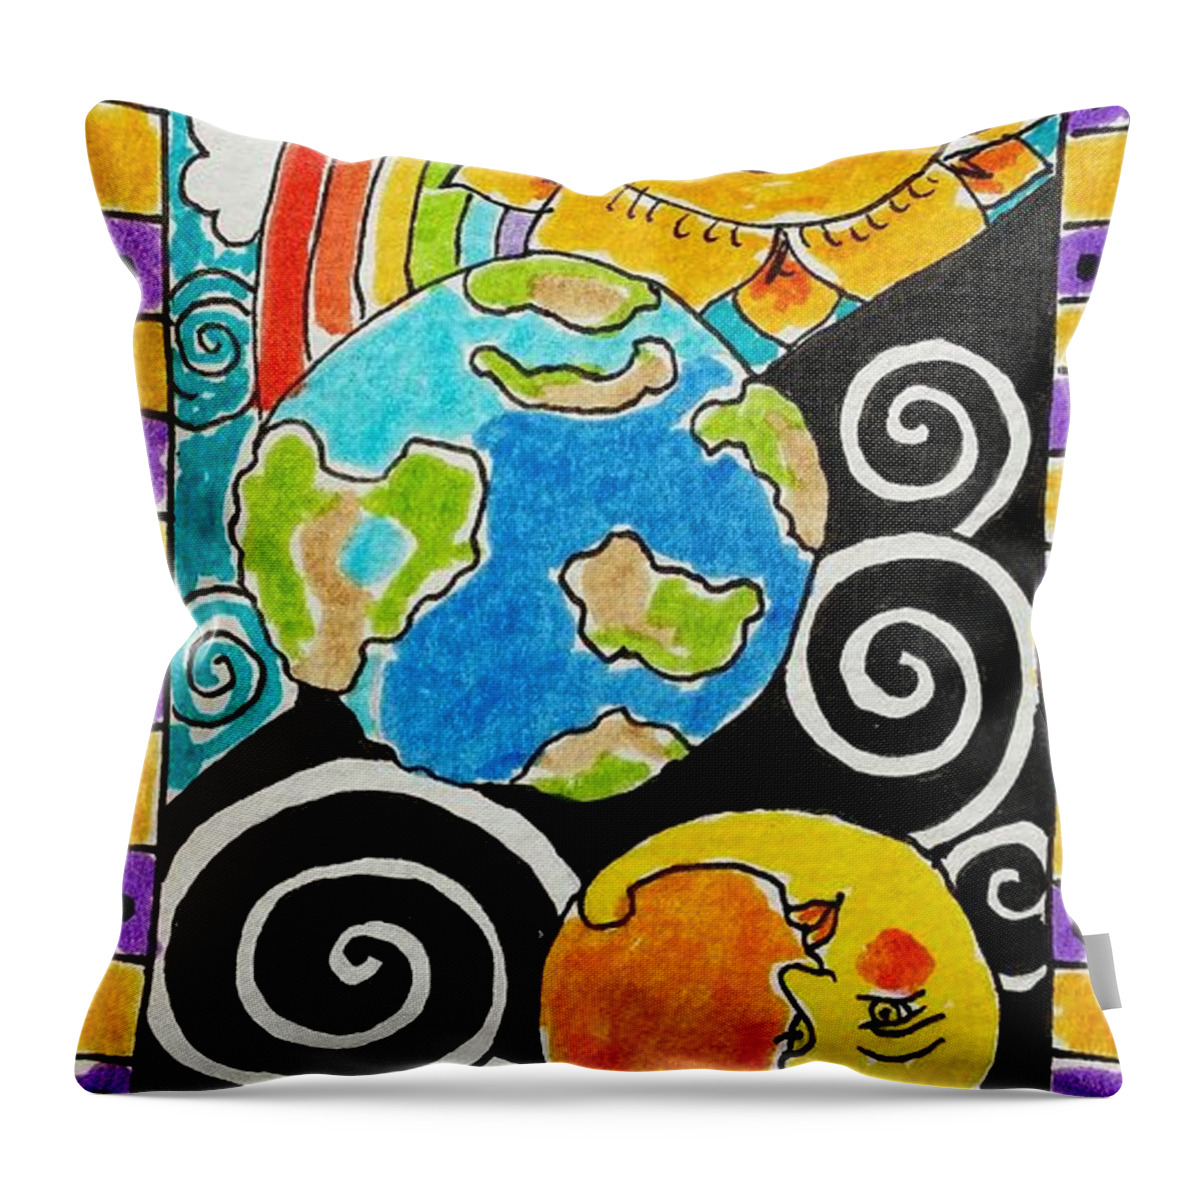 Tarot Throw Pillow featuring the drawing Intuitive Catalyst Card - World by Corey Habbas